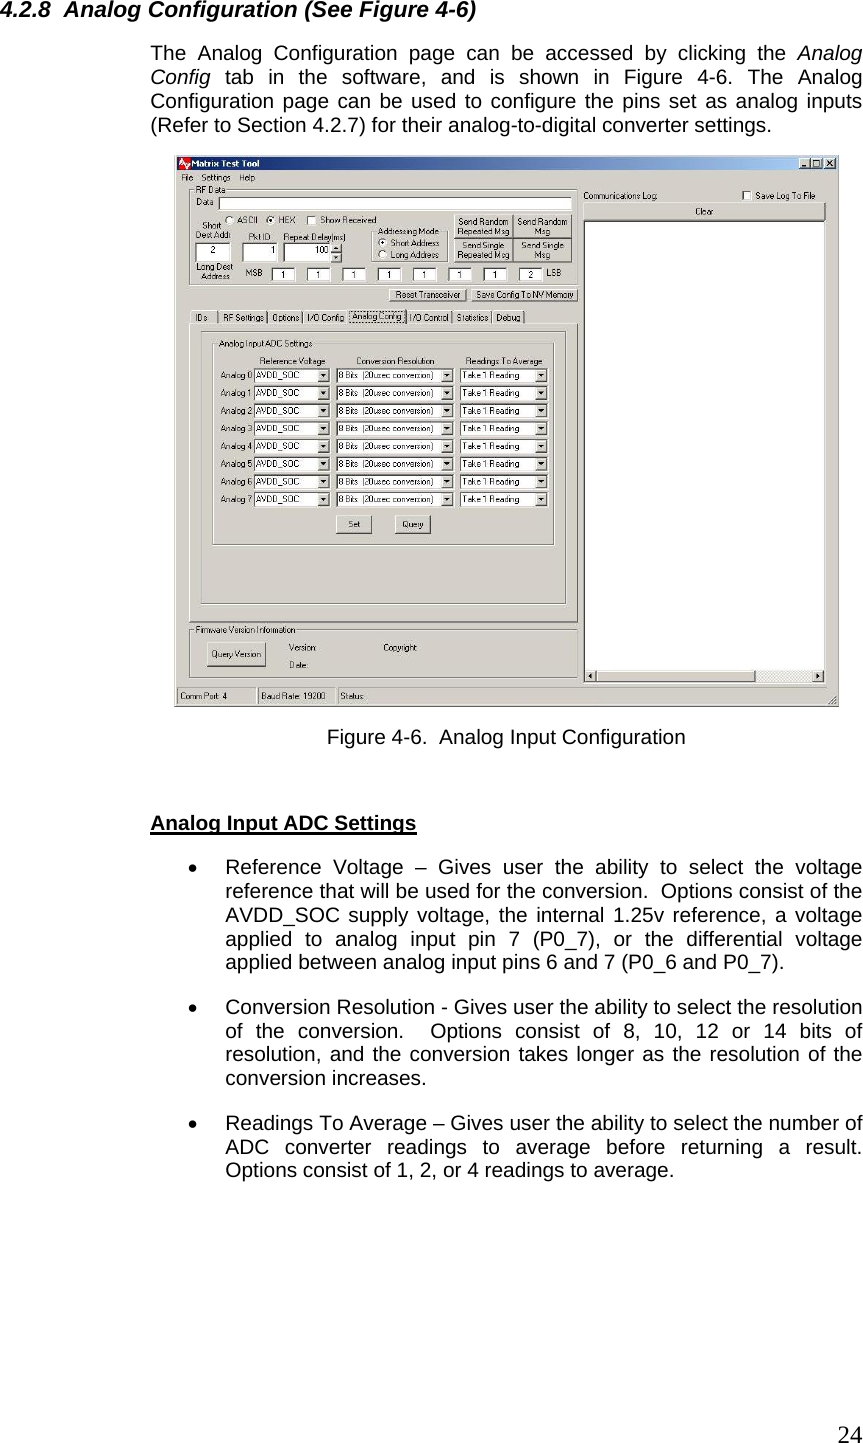  244.2.8  Analog Configuration (See Figure 4-6) The Analog Configuration page can be accessed by clicking the Analog Config tab in the software, and is shown in Figure 4-6. The Analog Configuration page can be used to configure the pins set as analog inputs (Refer to Section 4.2.7) for their analog-to-digital converter settings.  Figure 4-6.  Analog Input Configuration   Analog Input ADC Settings •  Reference Voltage – Gives user the ability to select the voltage reference that will be used for the conversion.  Options consist of the AVDD_SOC supply voltage, the internal 1.25v reference, a voltage applied to analog input pin 7 (P0_7), or the differential voltage applied between analog input pins 6 and 7 (P0_6 and P0_7). •  Conversion Resolution - Gives user the ability to select the resolution of the conversion.  Options consist of 8, 10, 12 or 14 bits of resolution, and the conversion takes longer as the resolution of the conversion increases. •  Readings To Average – Gives user the ability to select the number of ADC converter readings to average before returning a result.  Options consist of 1, 2, or 4 readings to average.    